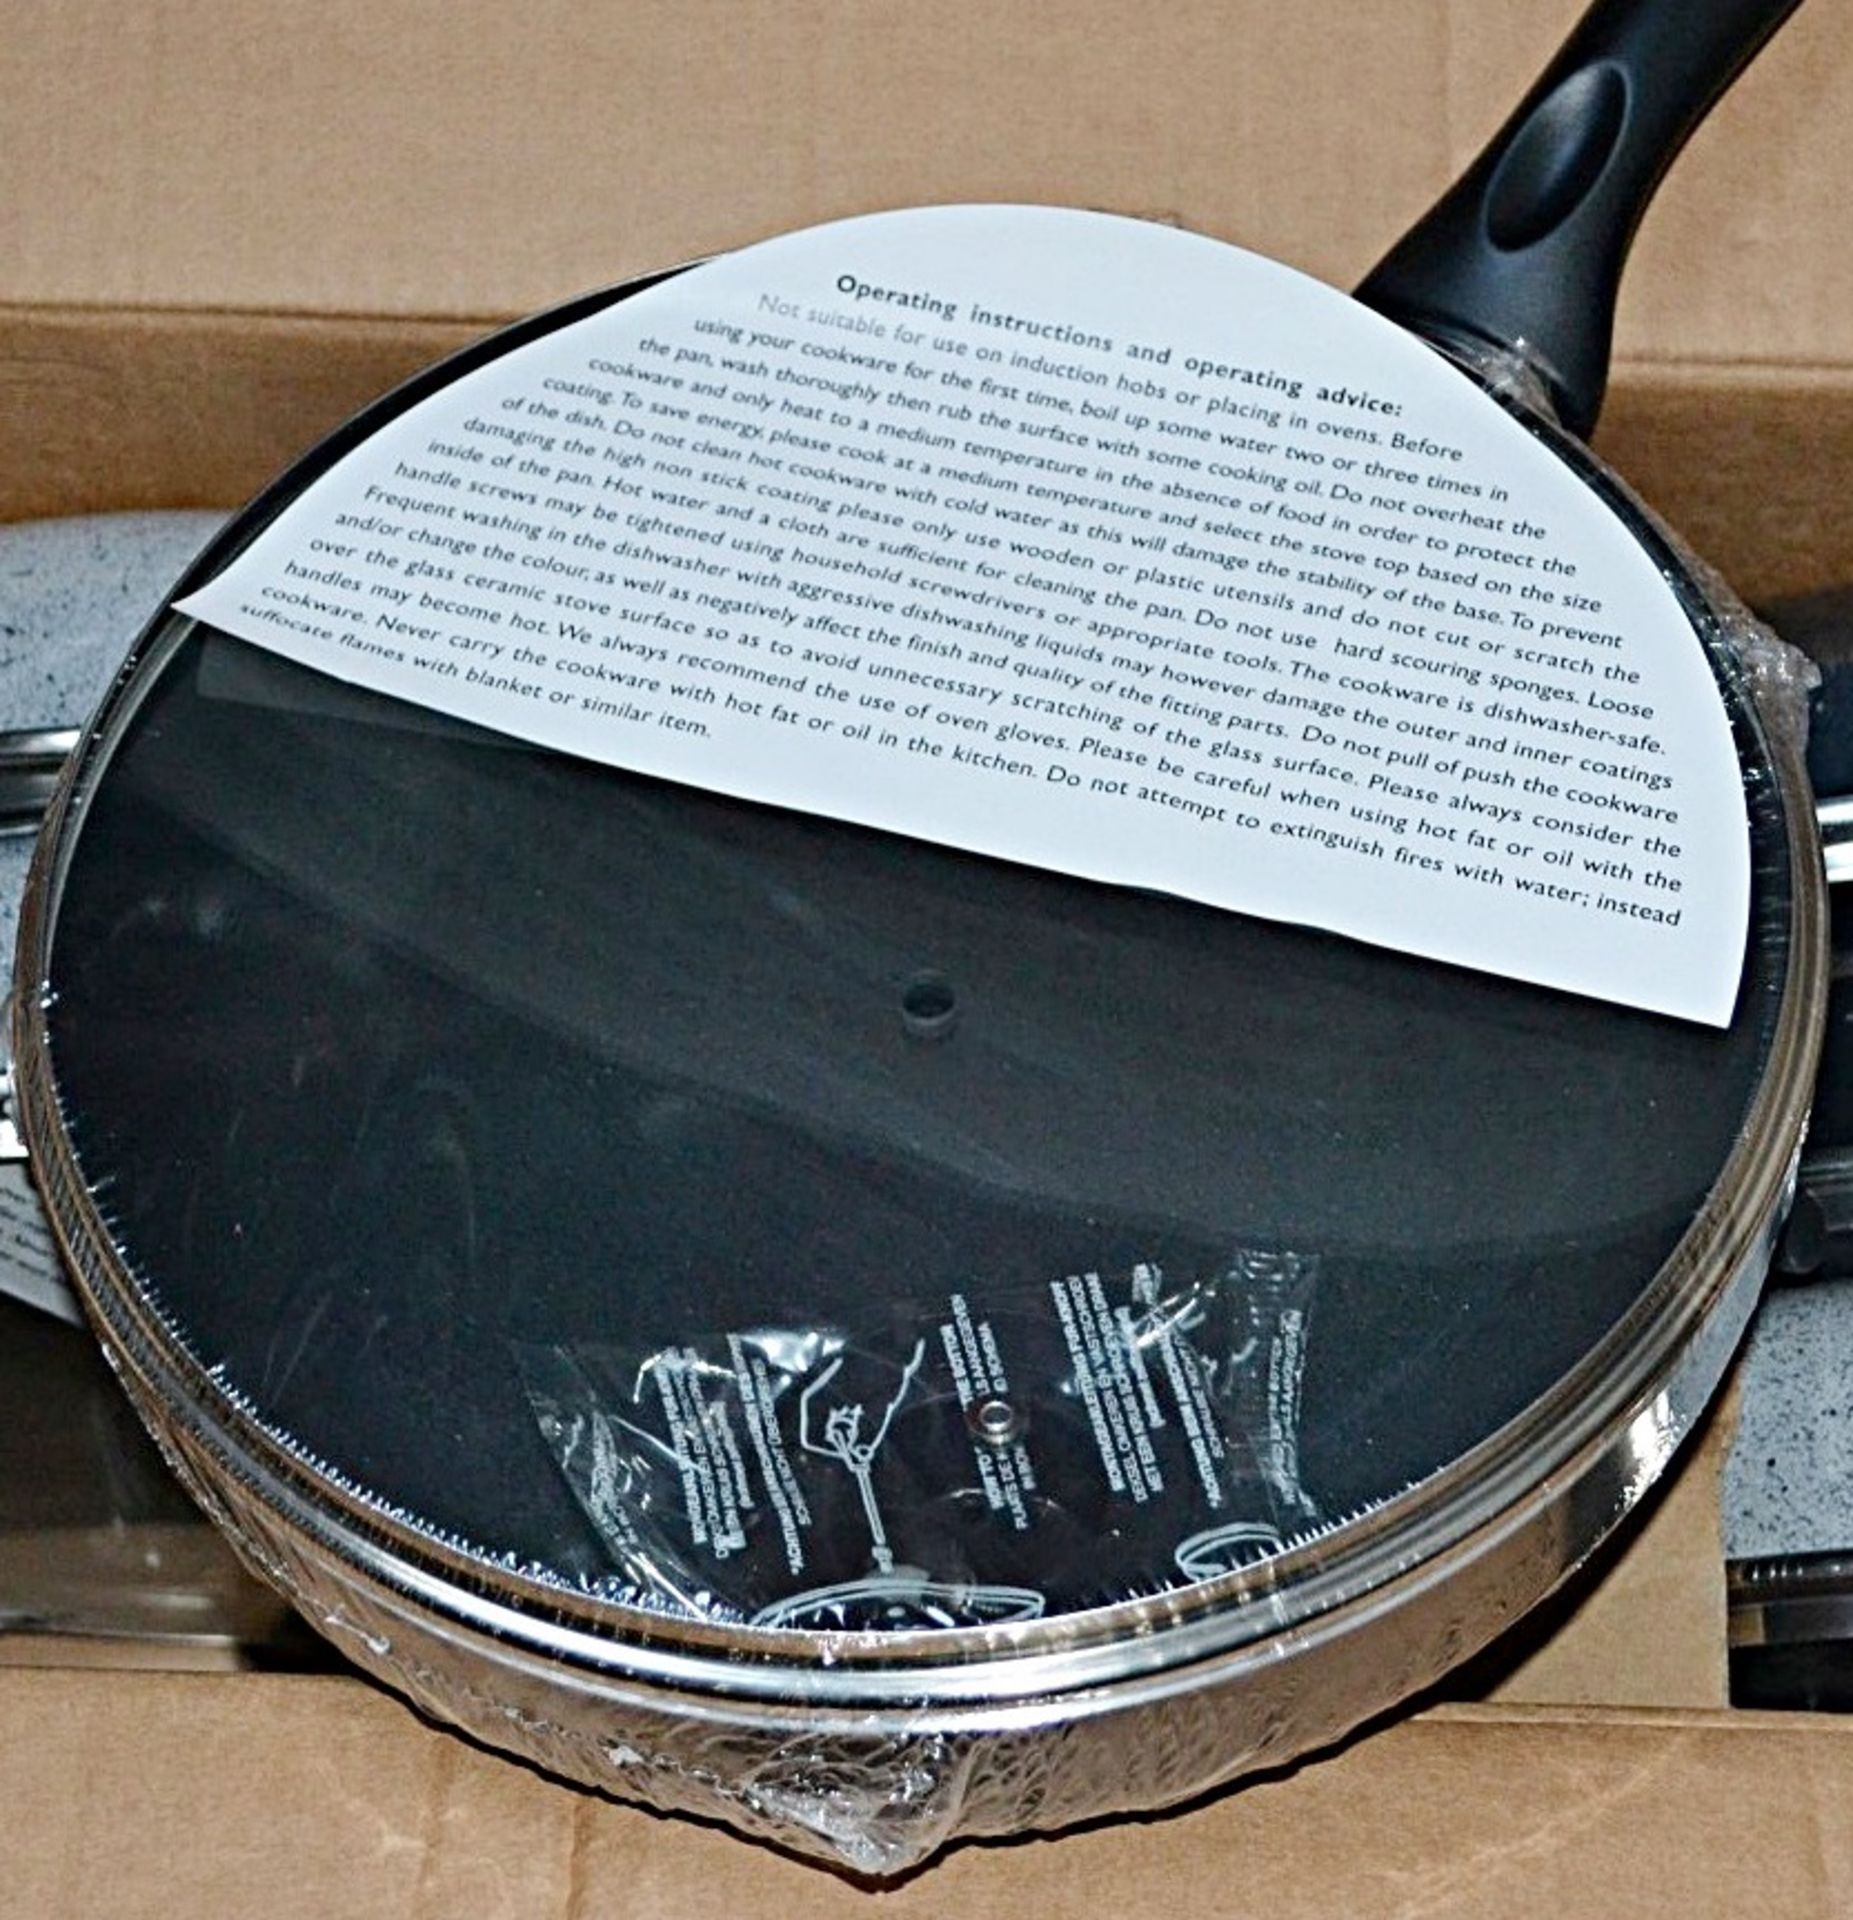 1 x 28cm Non-stick Frying Pans with Glass Lids - Colour: Stone Grey - Made In Italy - New & Sealed S - Bild 4 aus 5